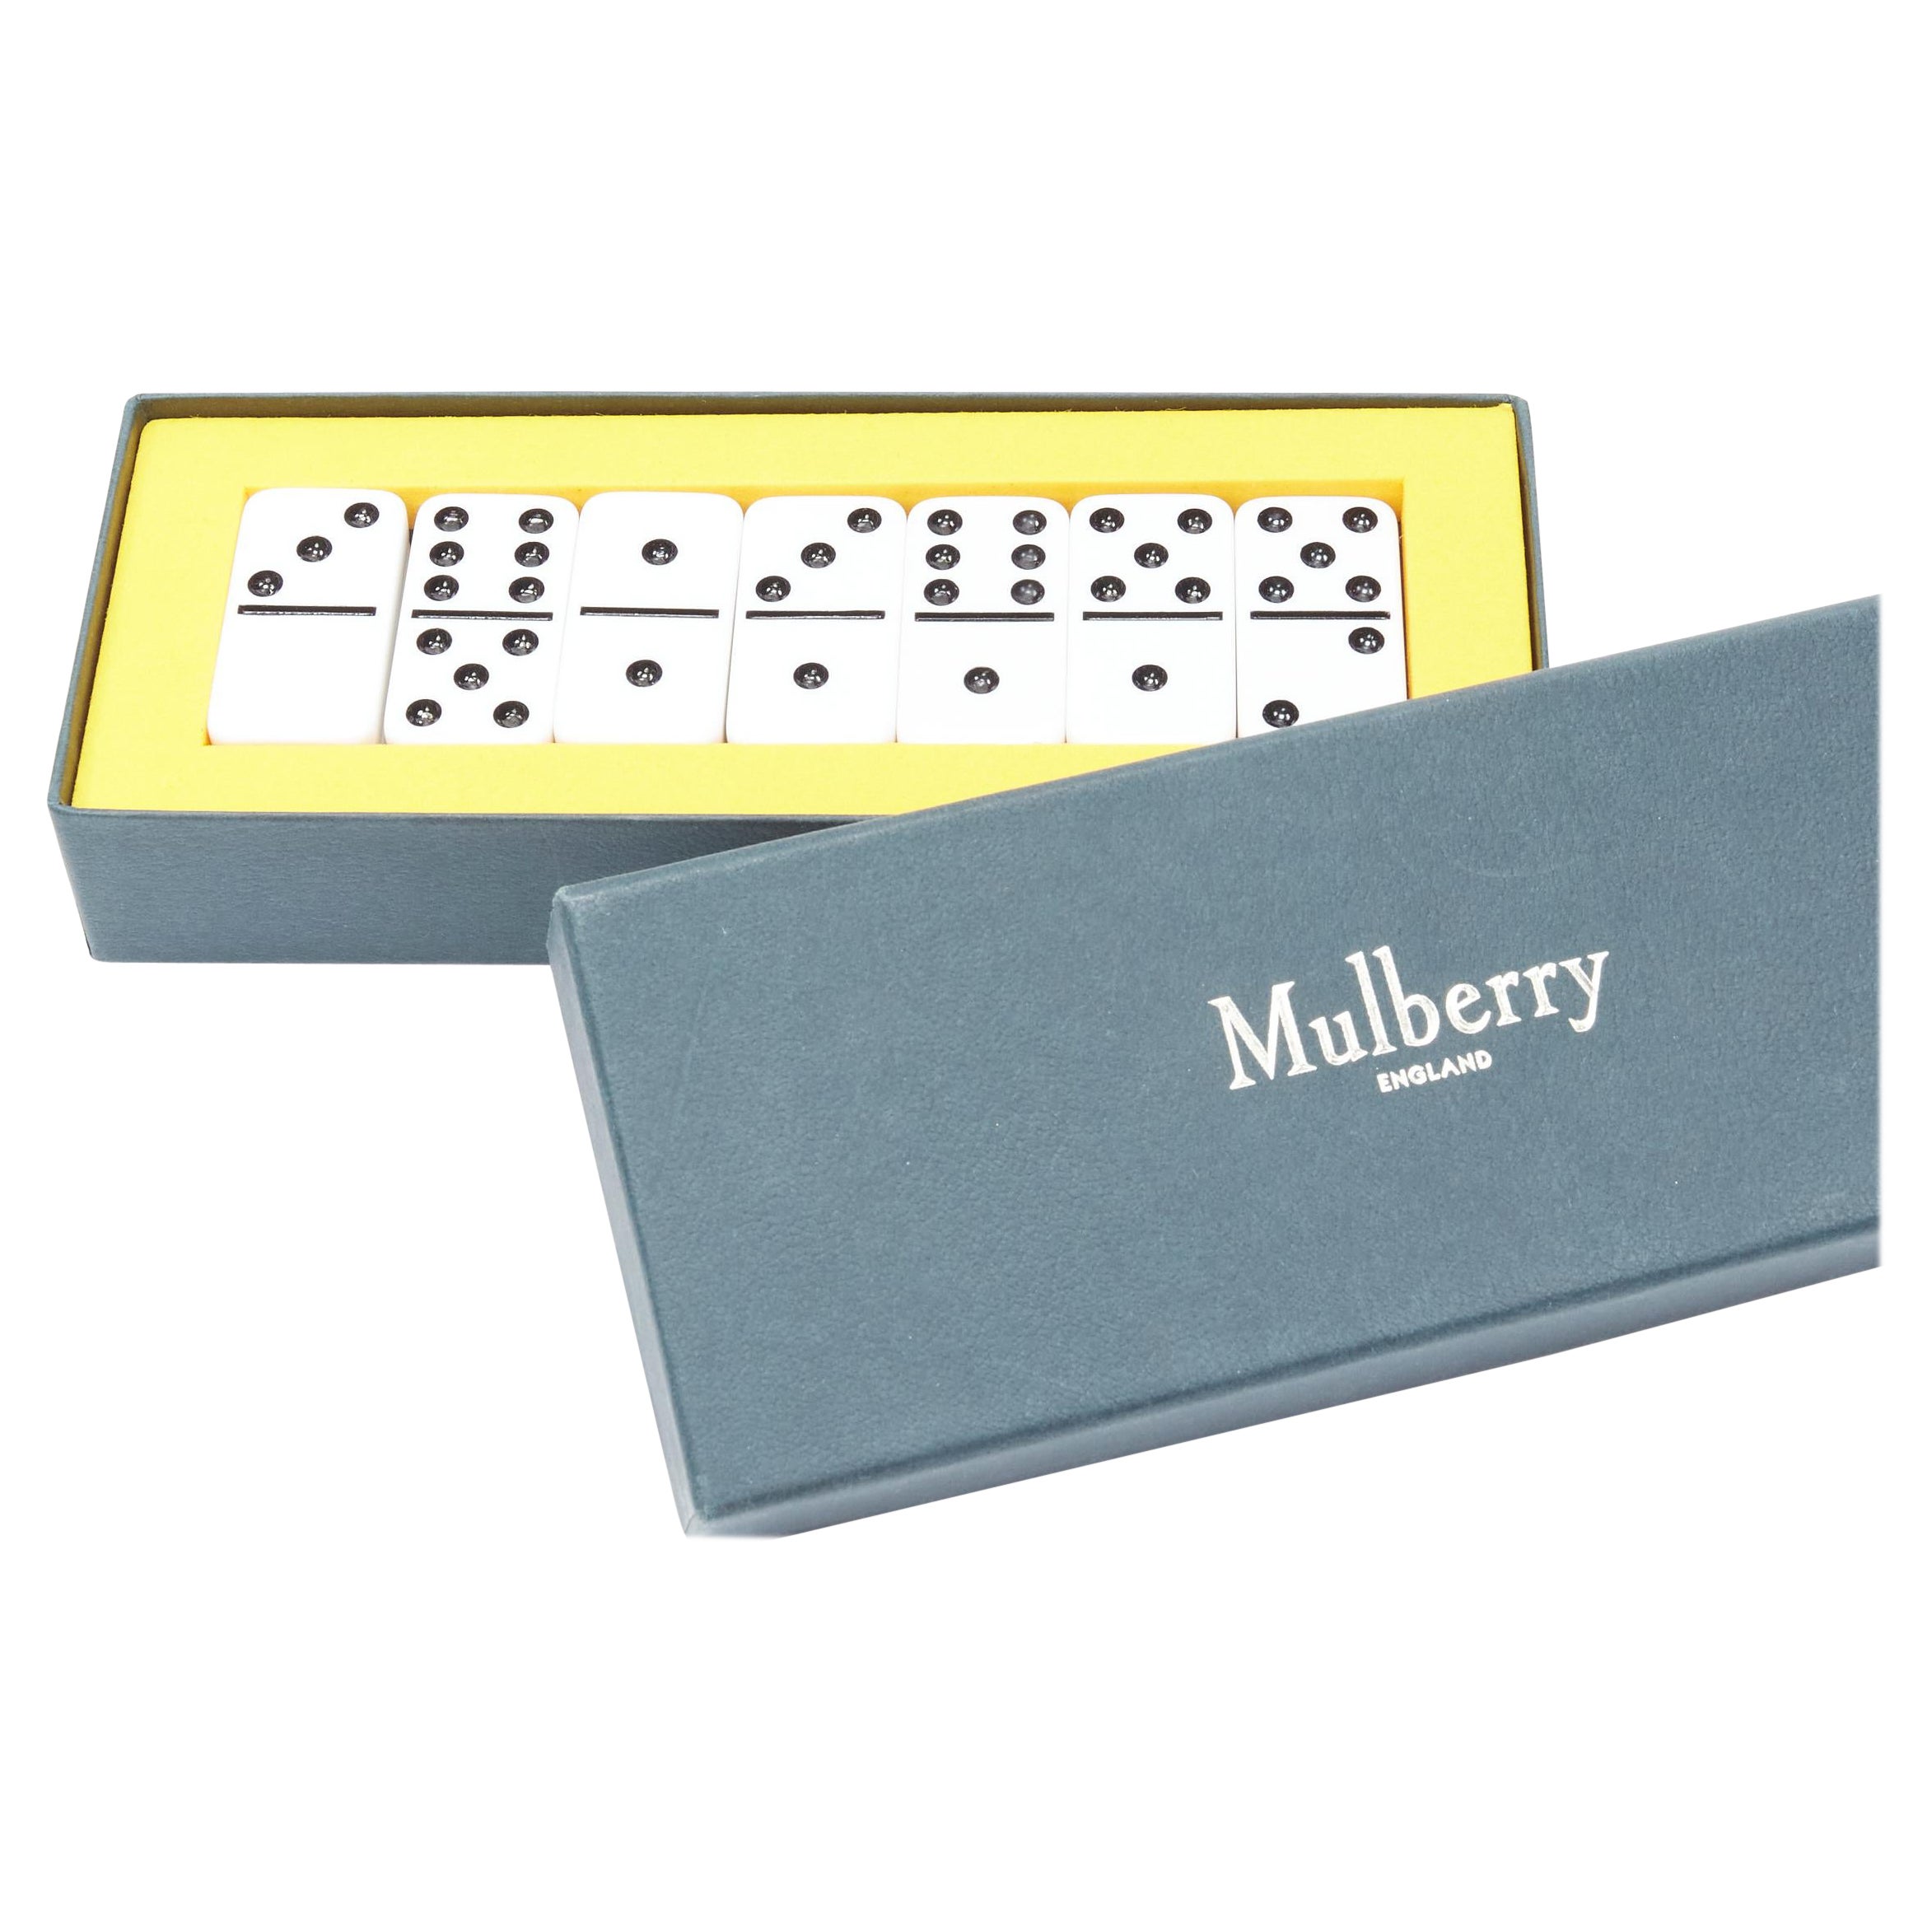 rare MULBERRY Dominoes board game set For Sale